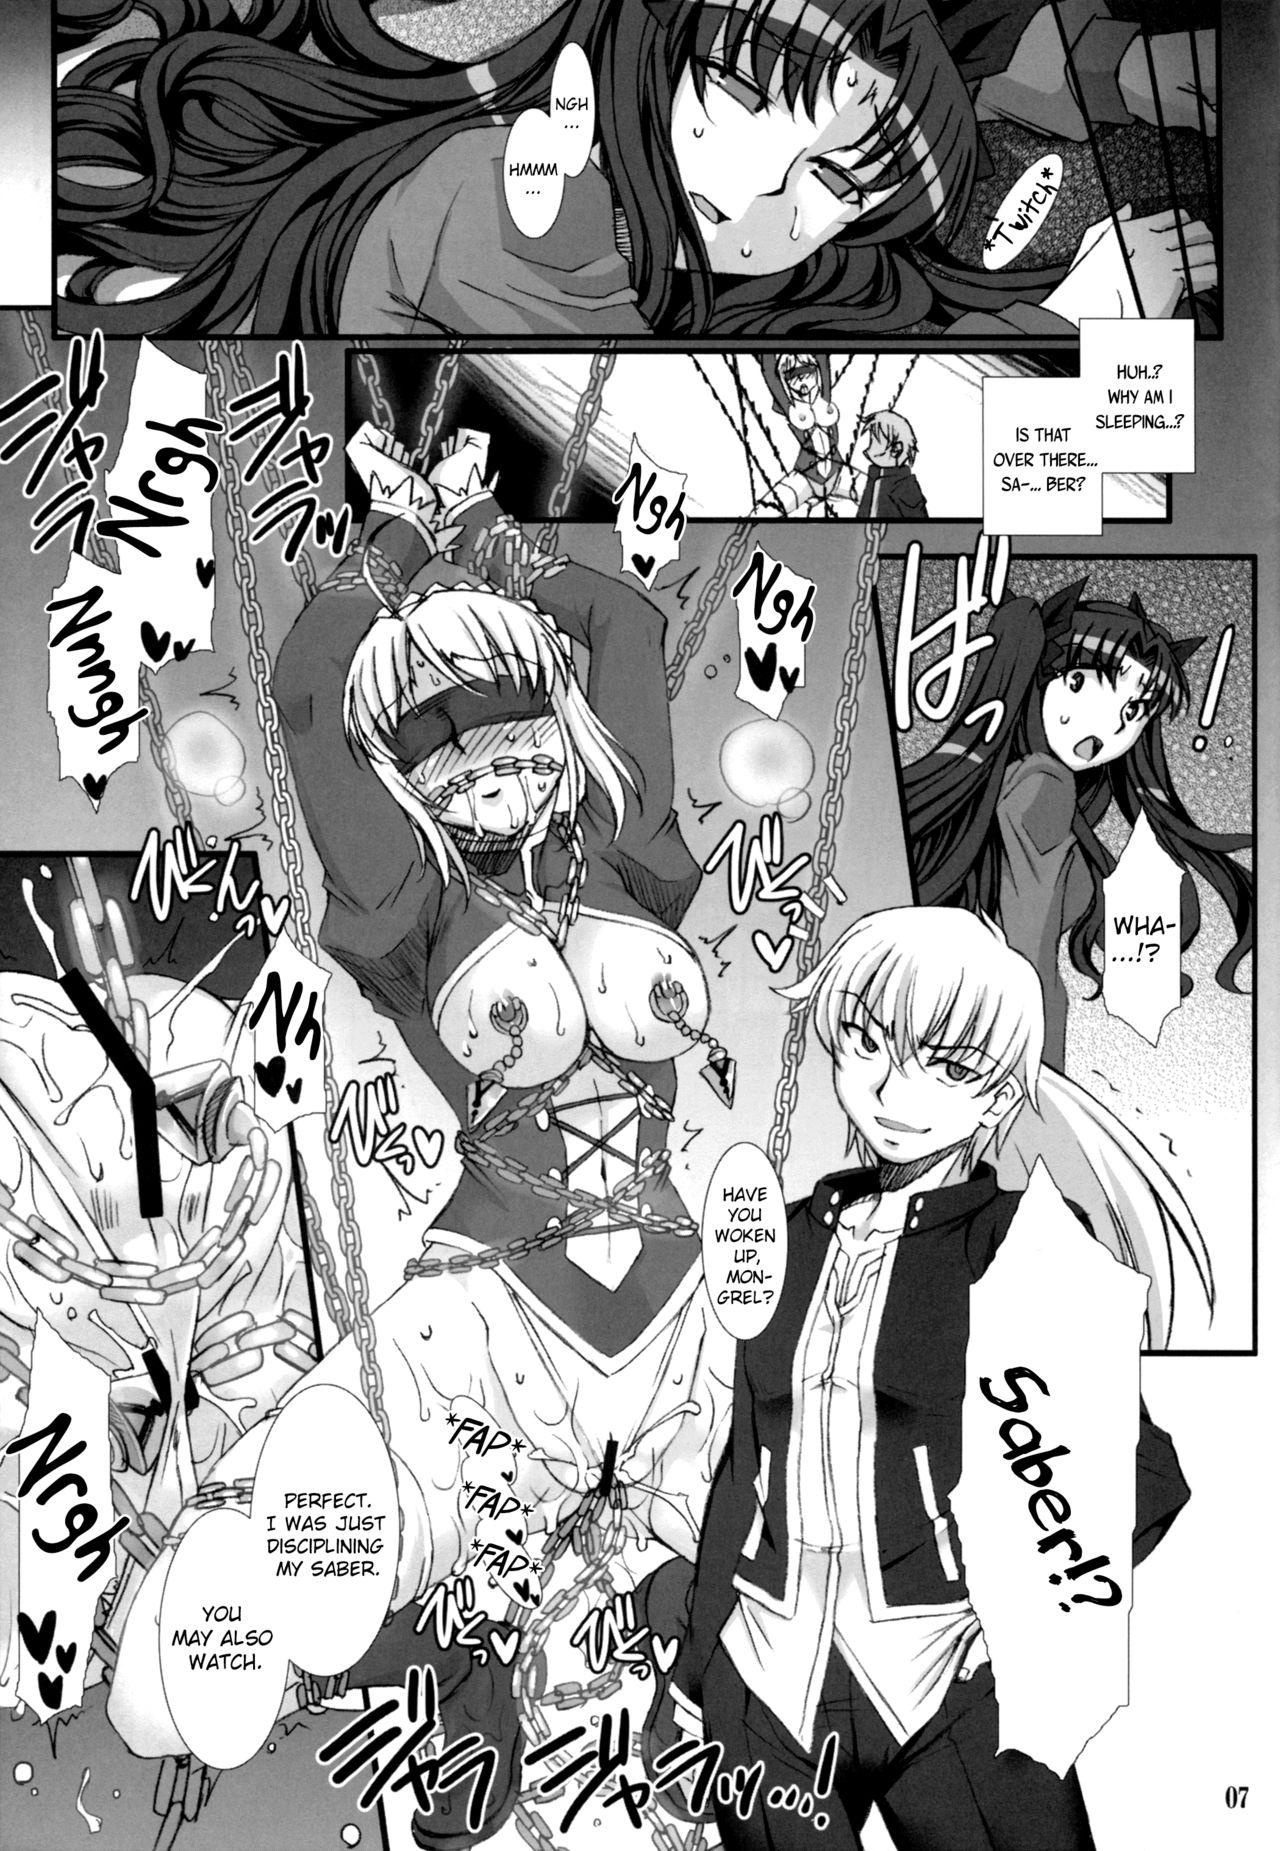 Monster (C88) [H.B (B-RIVER)] Rin Kai -Kegasareta Aka- | Rin Destruction -Stained Red- (Fate/stay night) [English] [ChoriScans] - Fate stay night Fantasy Massage - Page 7